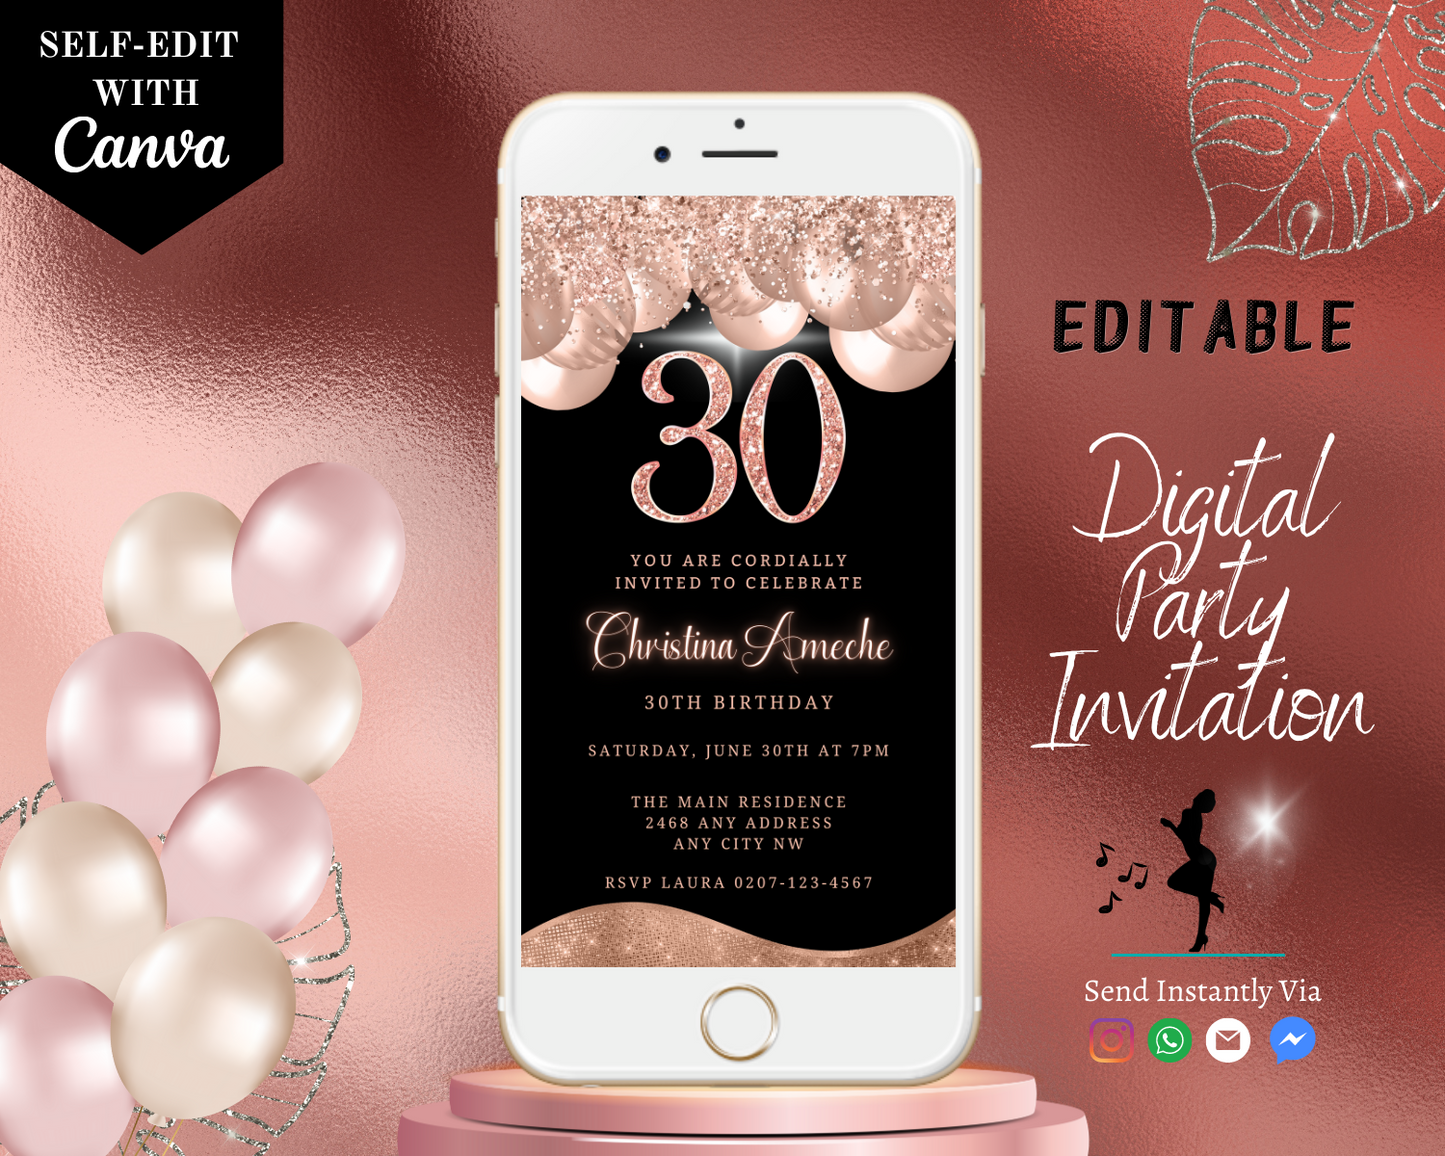 Customizable digital invitation for a 30th birthday with rose gold balloons on a cellphone screen, designed for editing with Canva and sharing electronically.